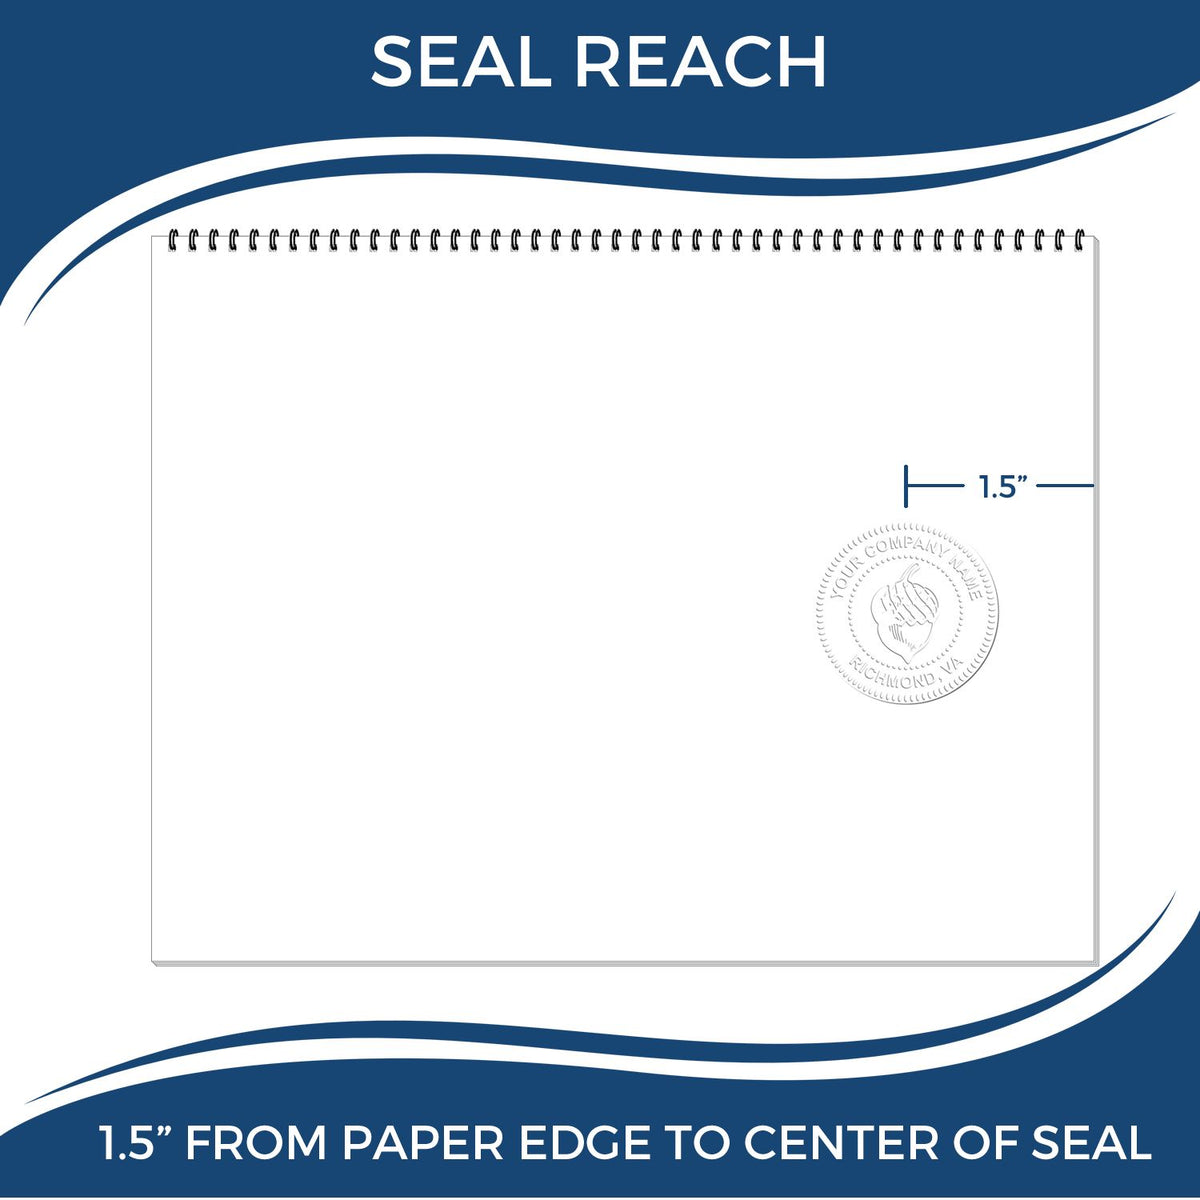 An infographic showing the seal reach which is represented by a ruler and a miniature seal image of the Handheld West Virginia Architect Seal Embosser